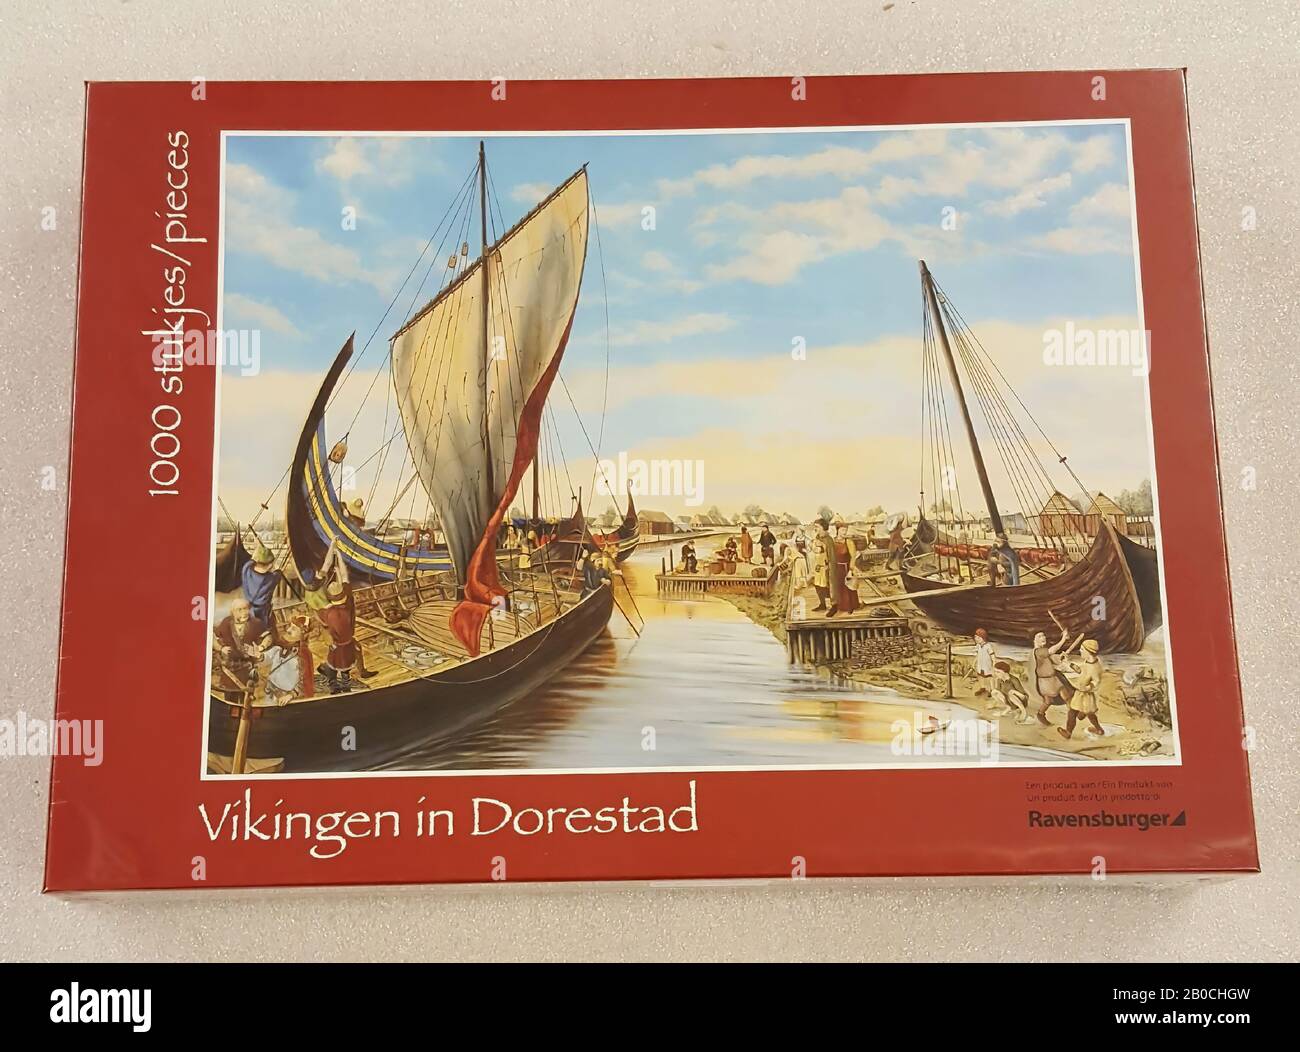 A Ravensburger puzzle (1000 pieces) with as picture the new school plate  Vikings in Dorestad by Paul Becx., Puzzle, organic, cardboard, 37,2 x 27,2  x 5,3 cm, modern 2009, The Netherlands, Utrecht,